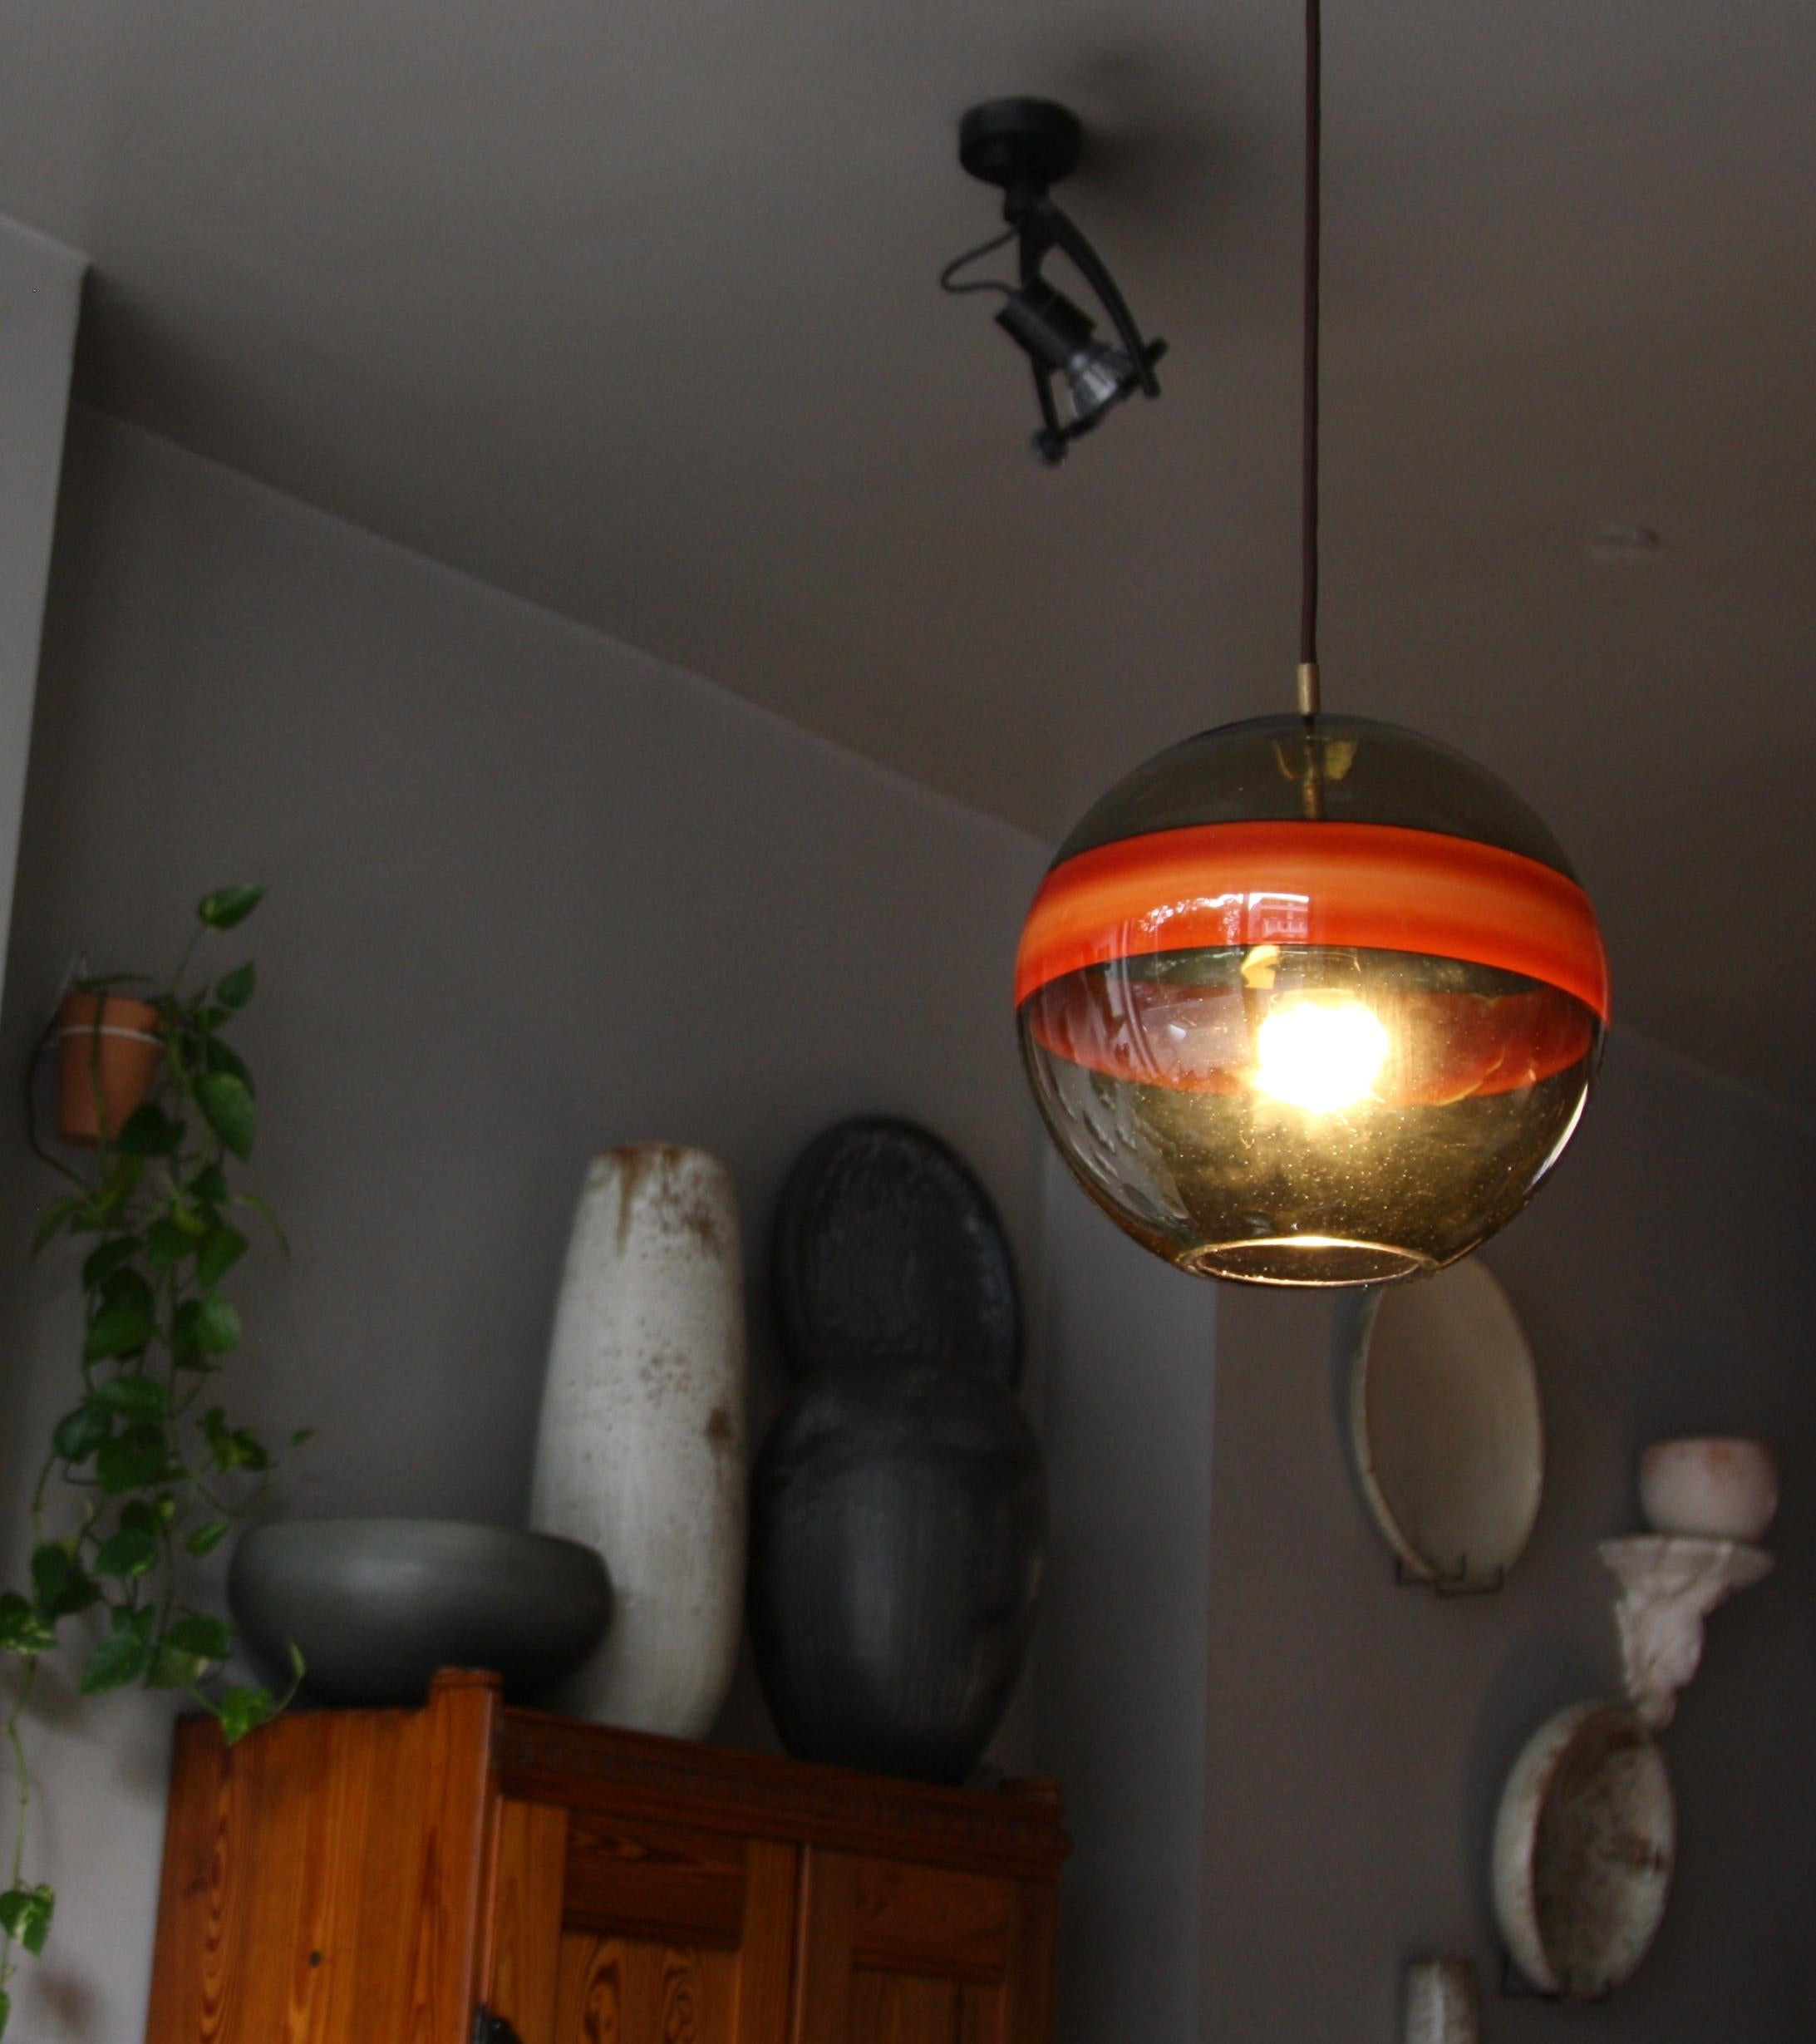 A vintage mouth-blown glass pendant light designed and made in Italy, attributed to Venini, circa 1955.
The predominant color of the glass globe is translucent ‘smoke’ (brown/green/grey) a popular choice of color for glass makers in the mid-20th